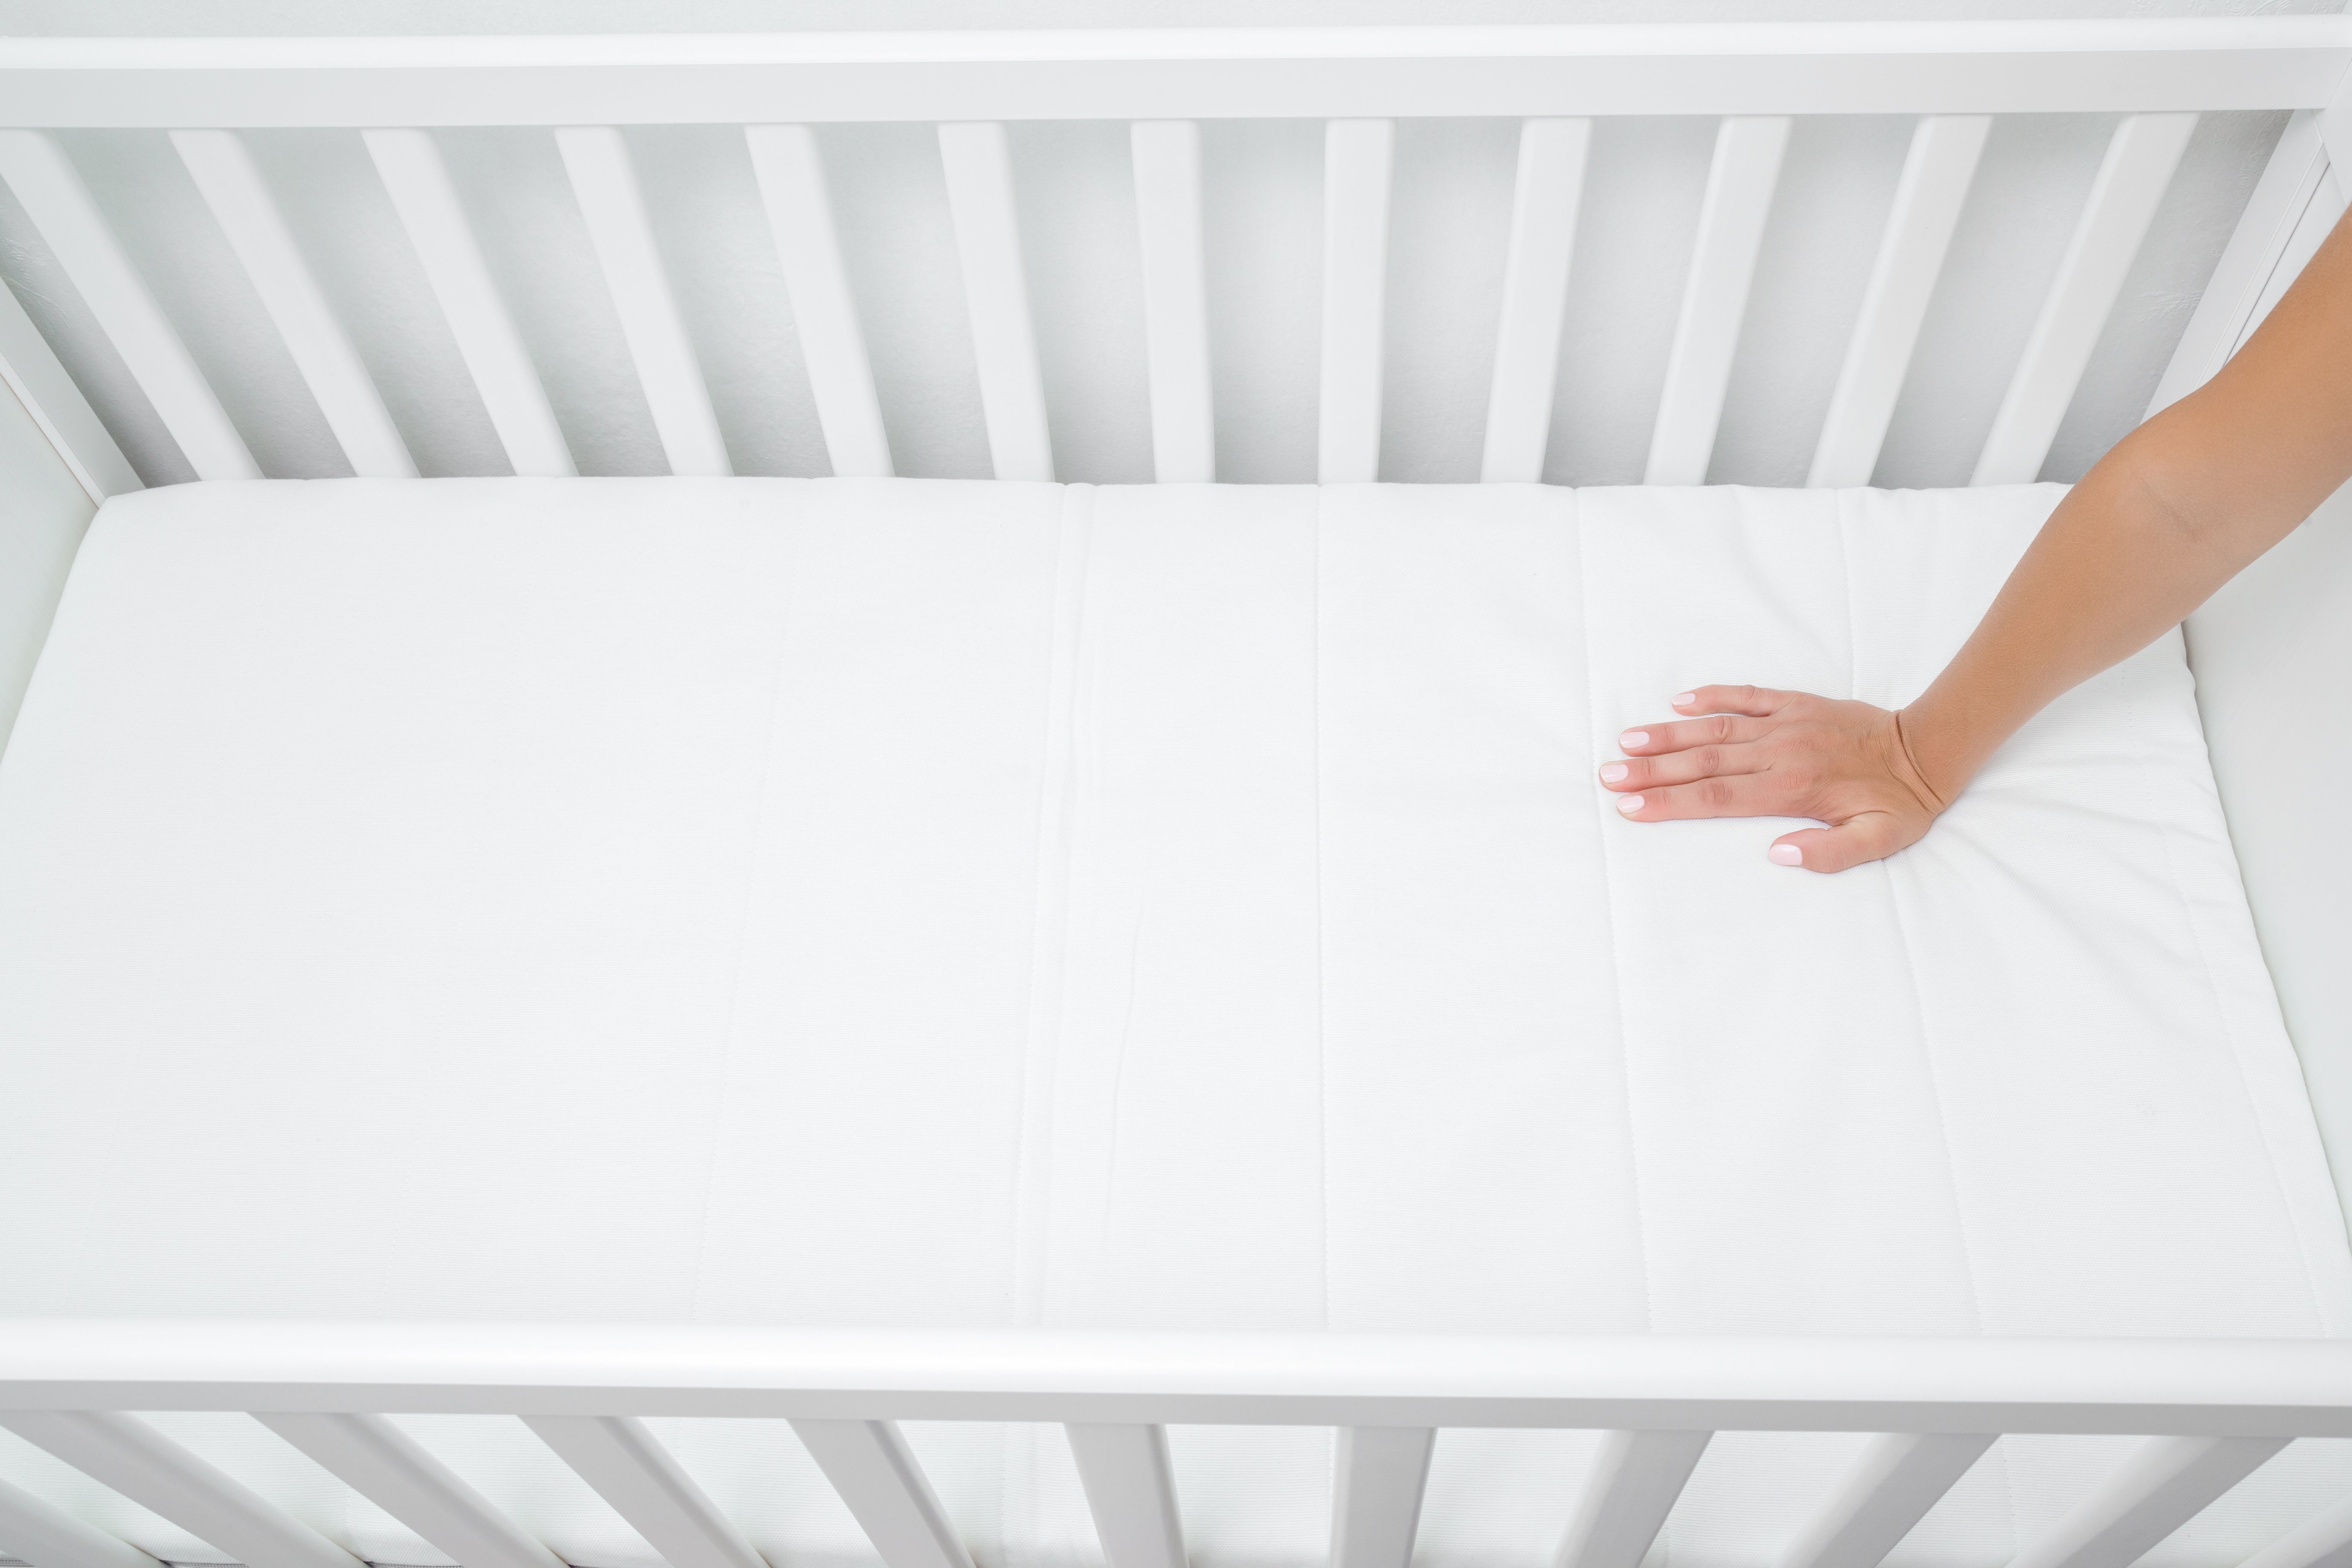 A firm mattress and healthy cot perfect for safe sleep for baby